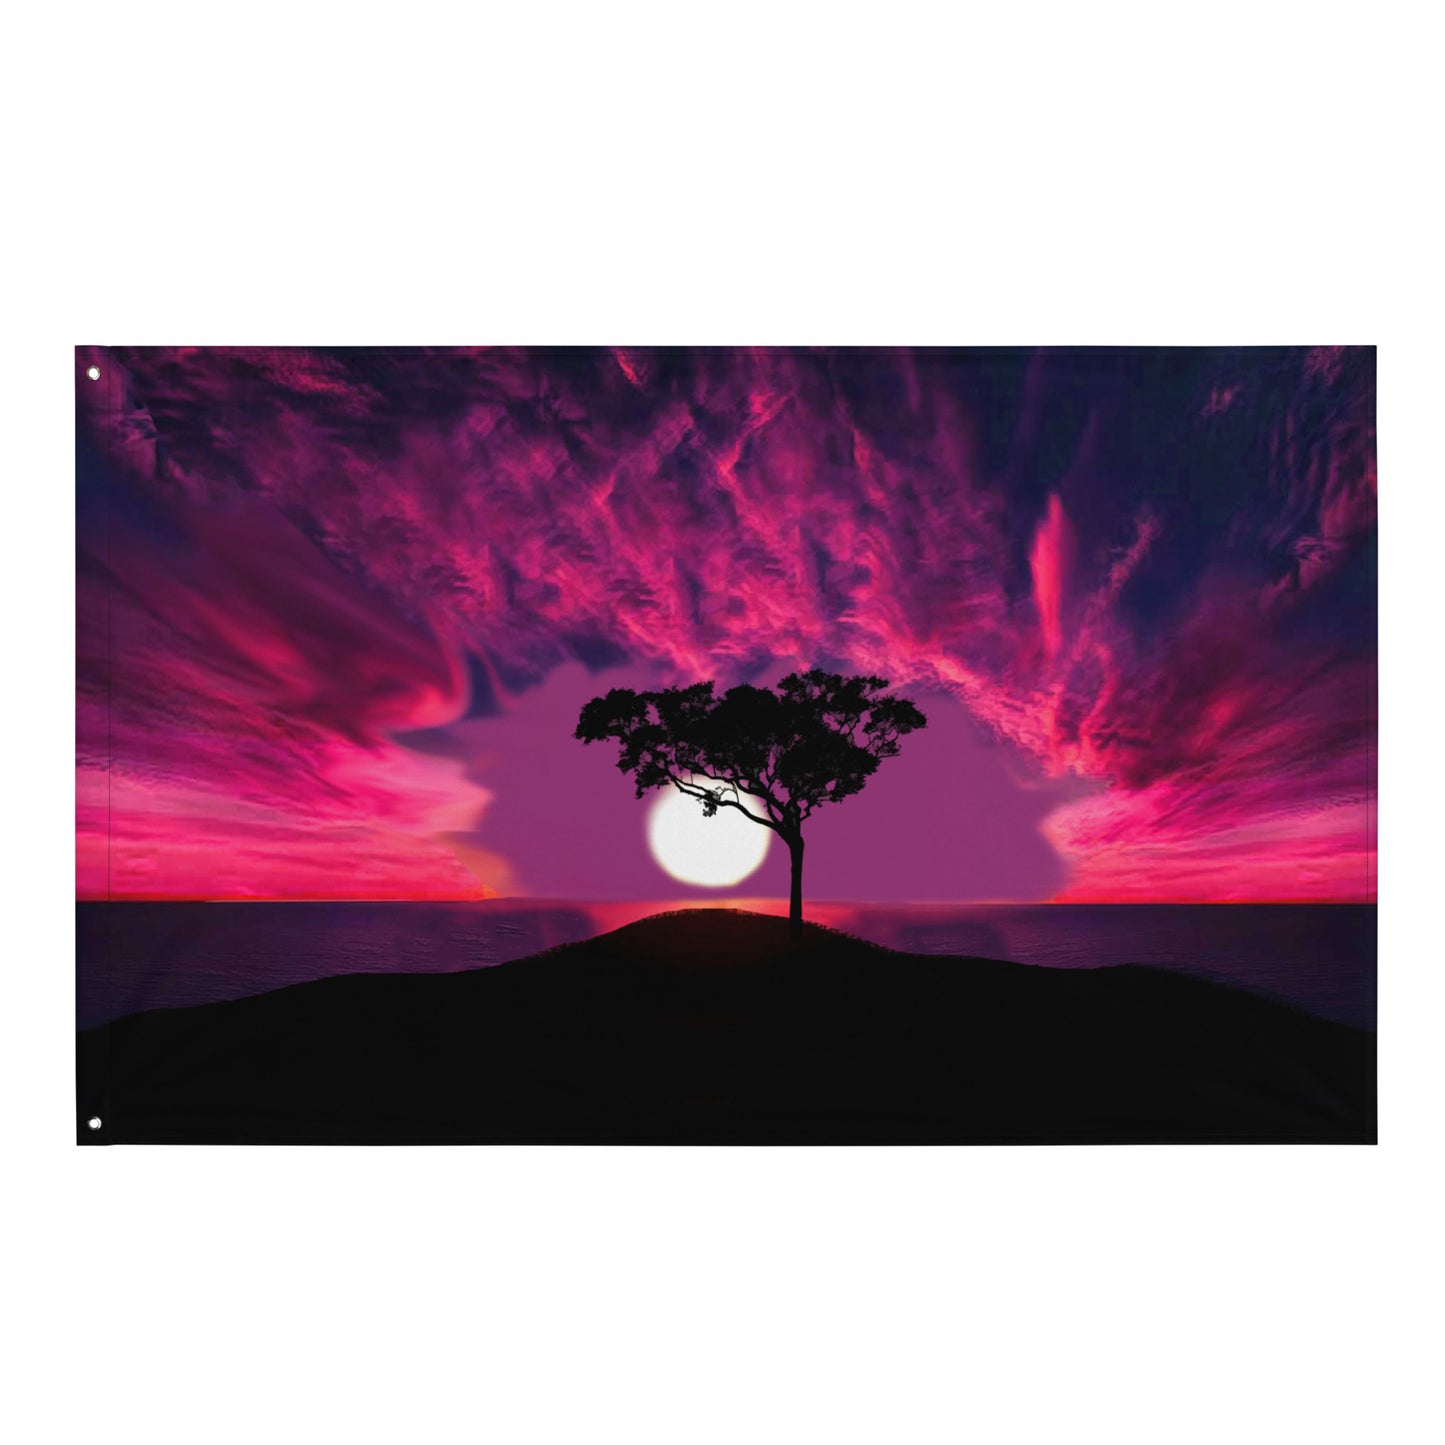 Sunset Flag Tapestry wall hanging